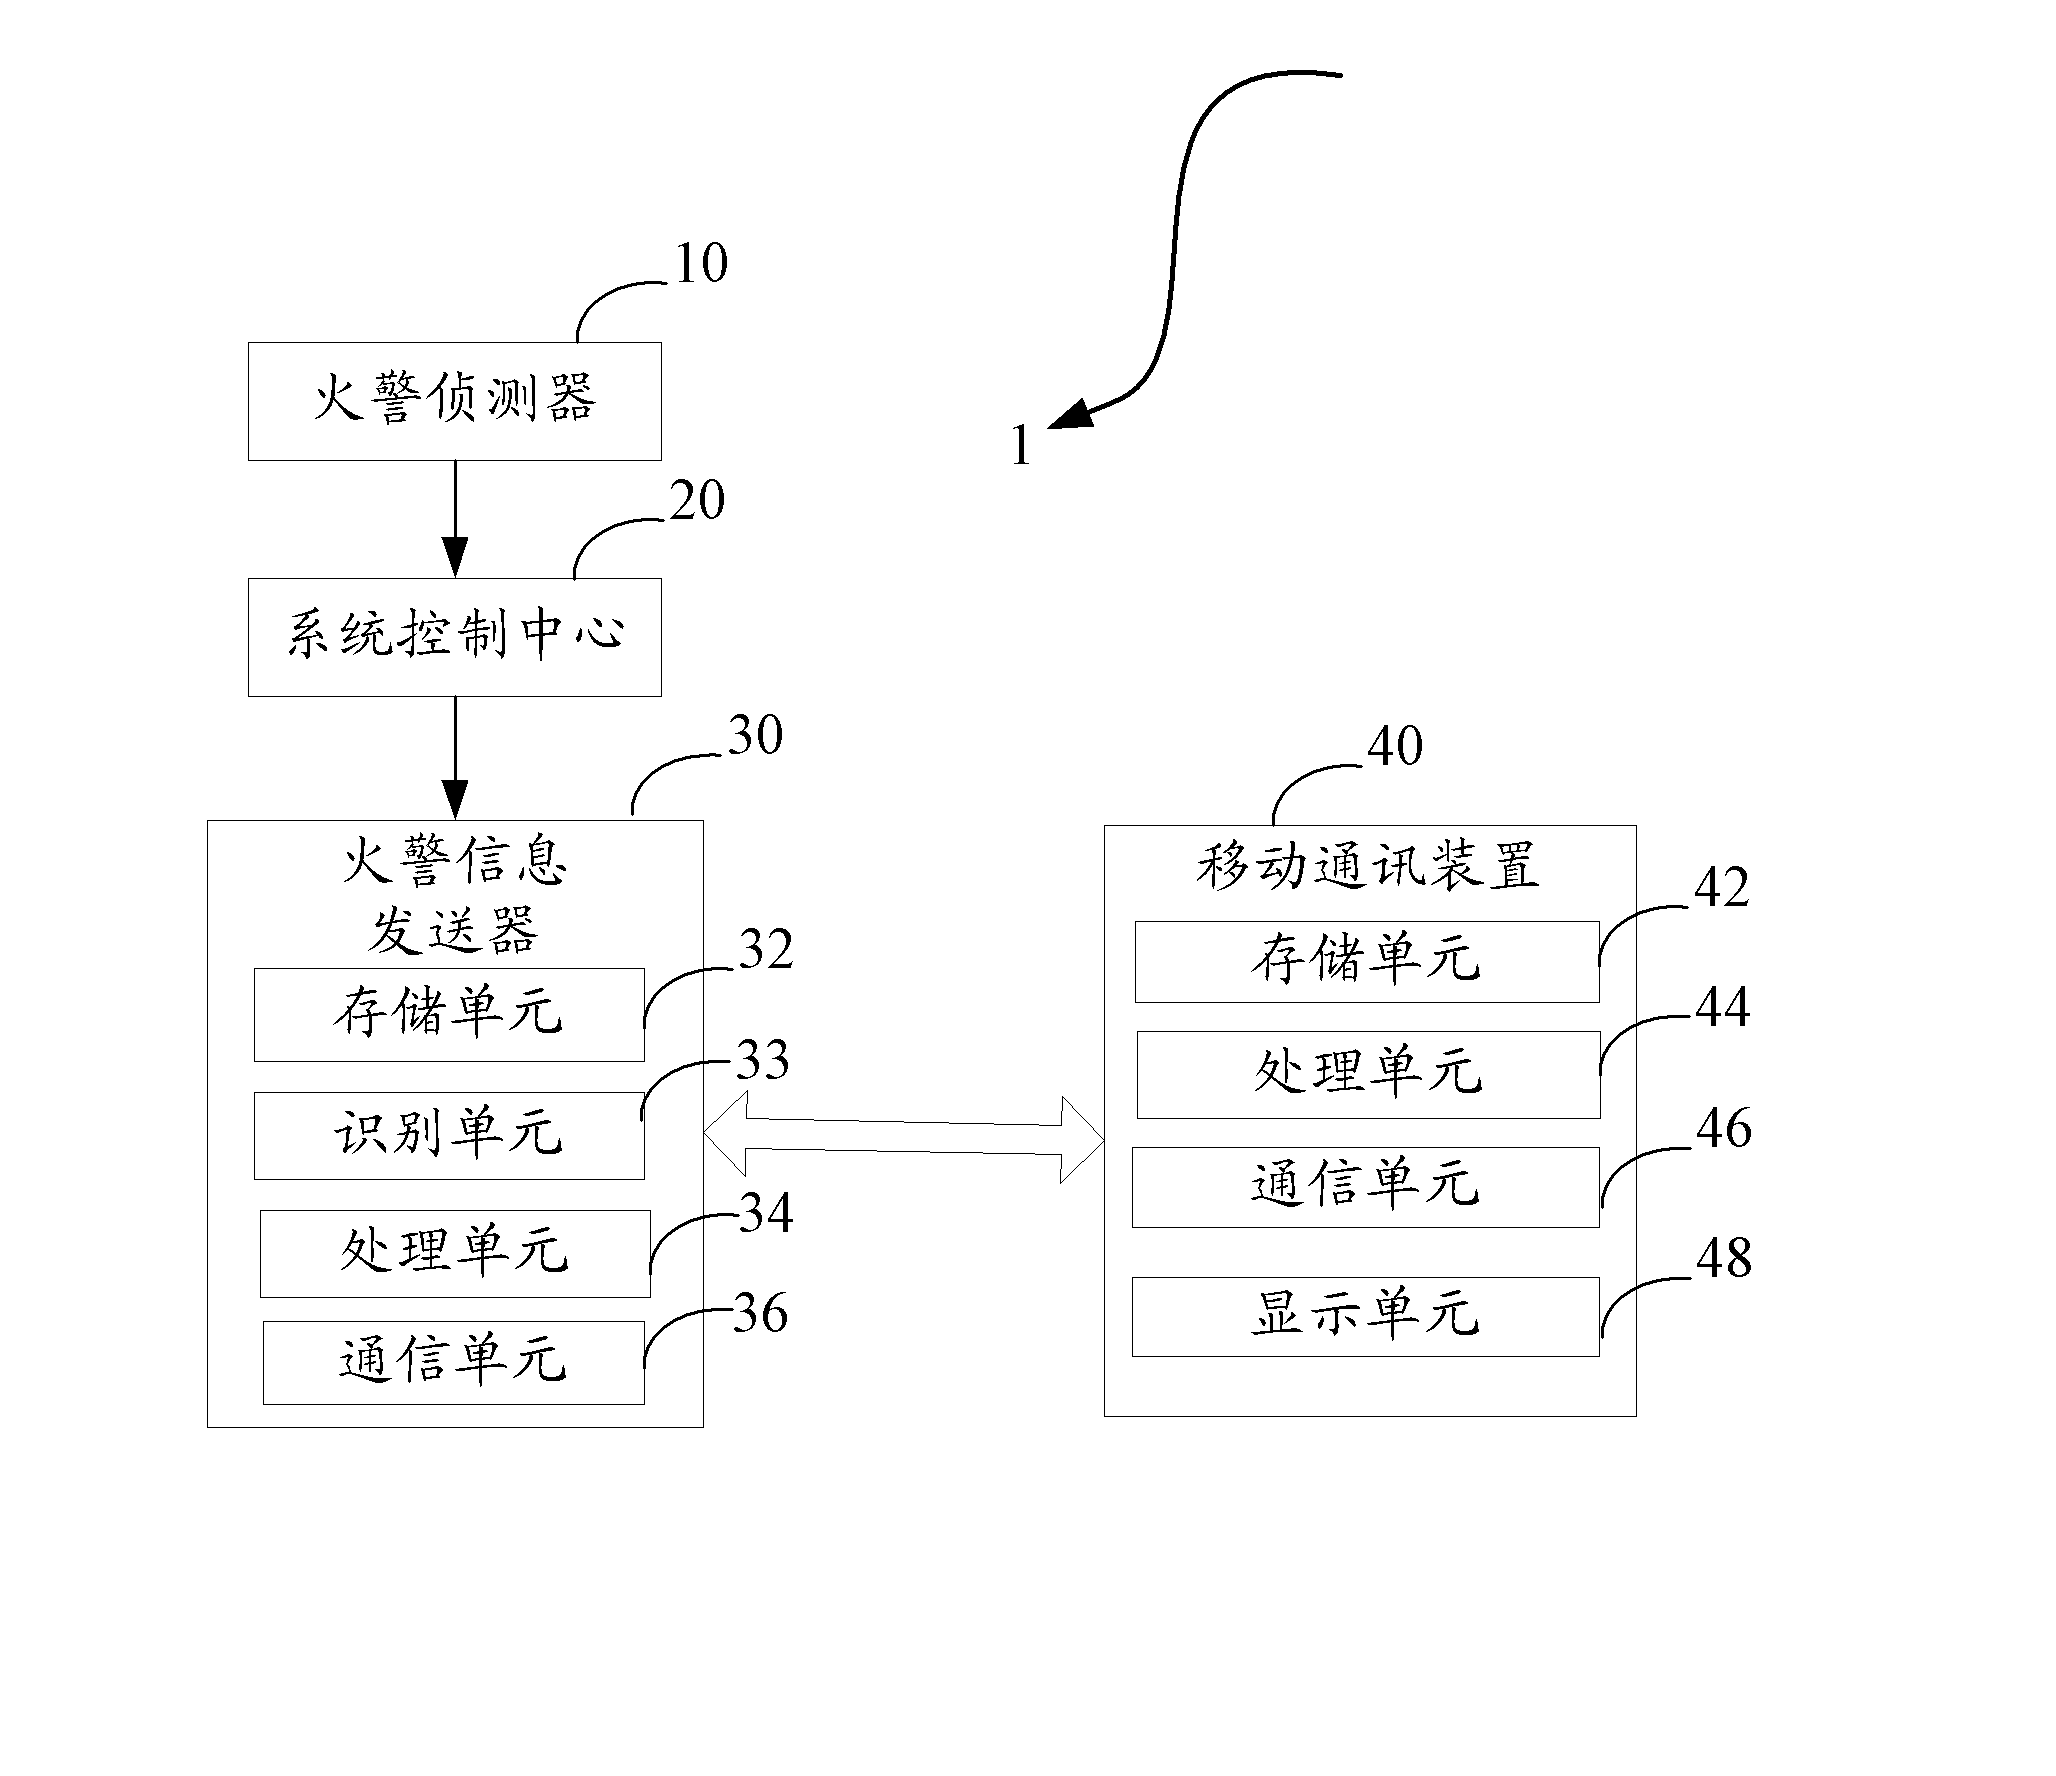 Fire escape guiding system and method